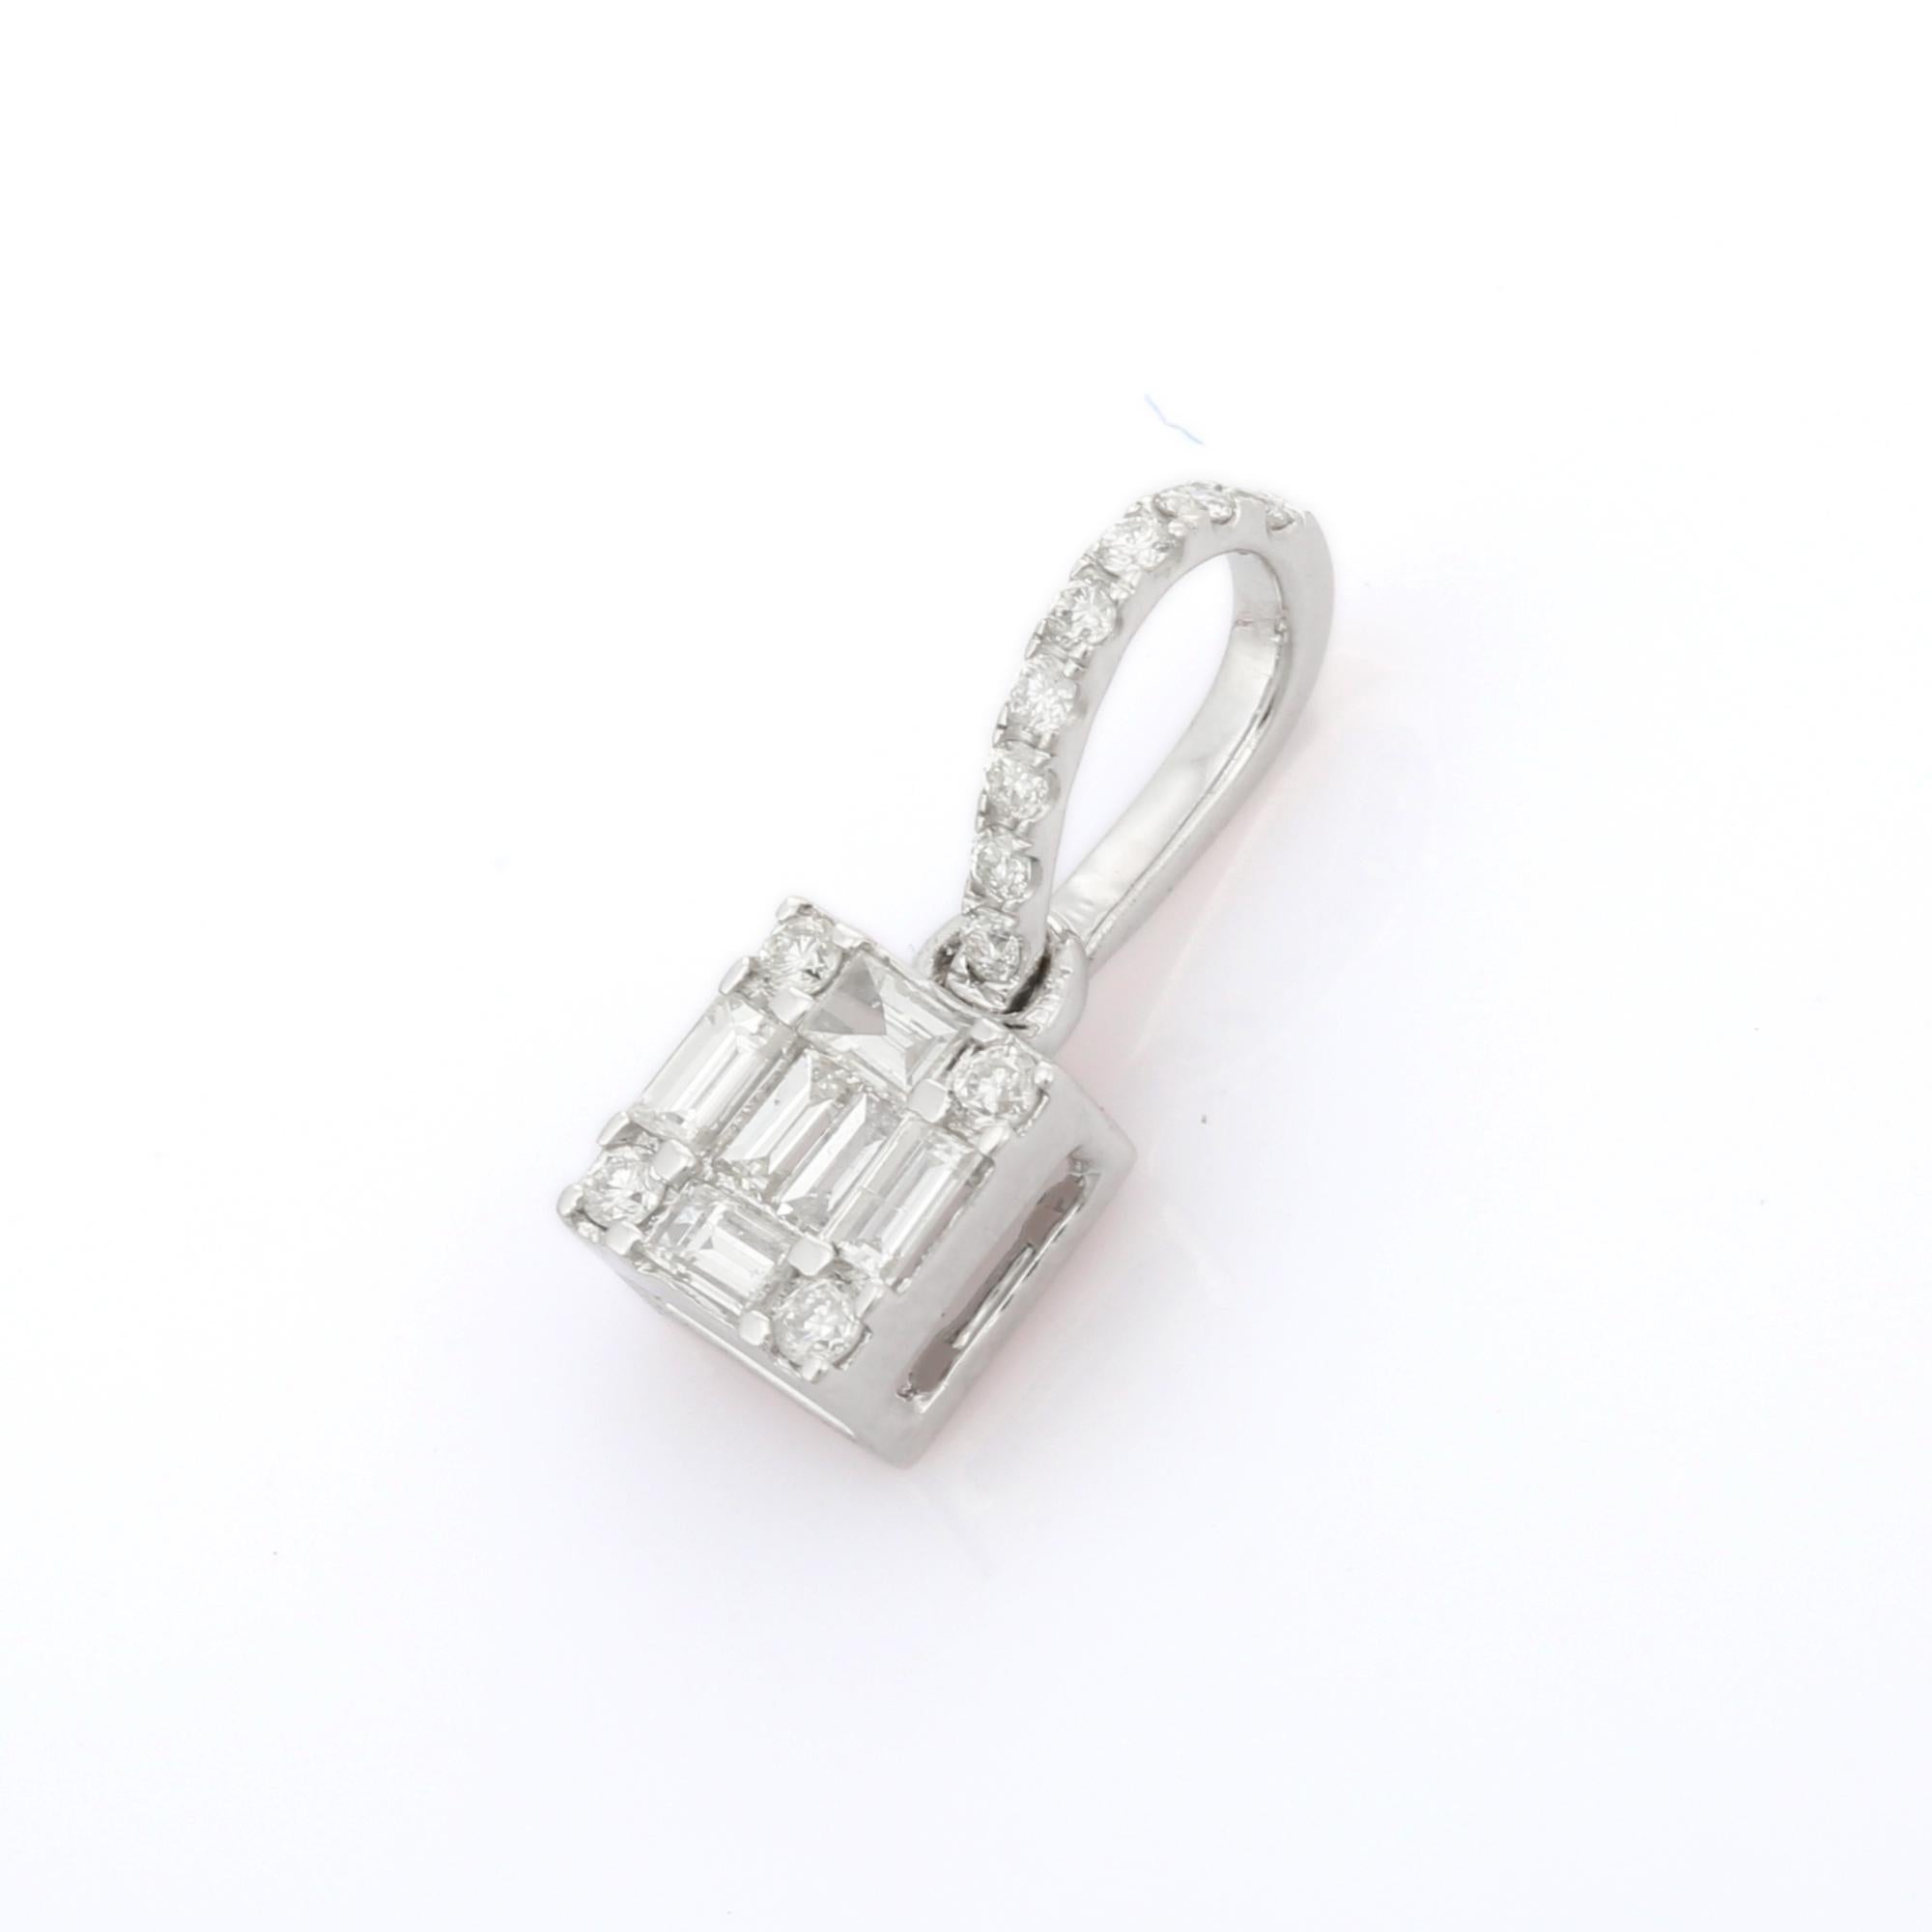 0.35 ct Diamond Wedding Pendant Necklace For Her Studded in 14K White Gold In New Condition For Sale In Houston, TX